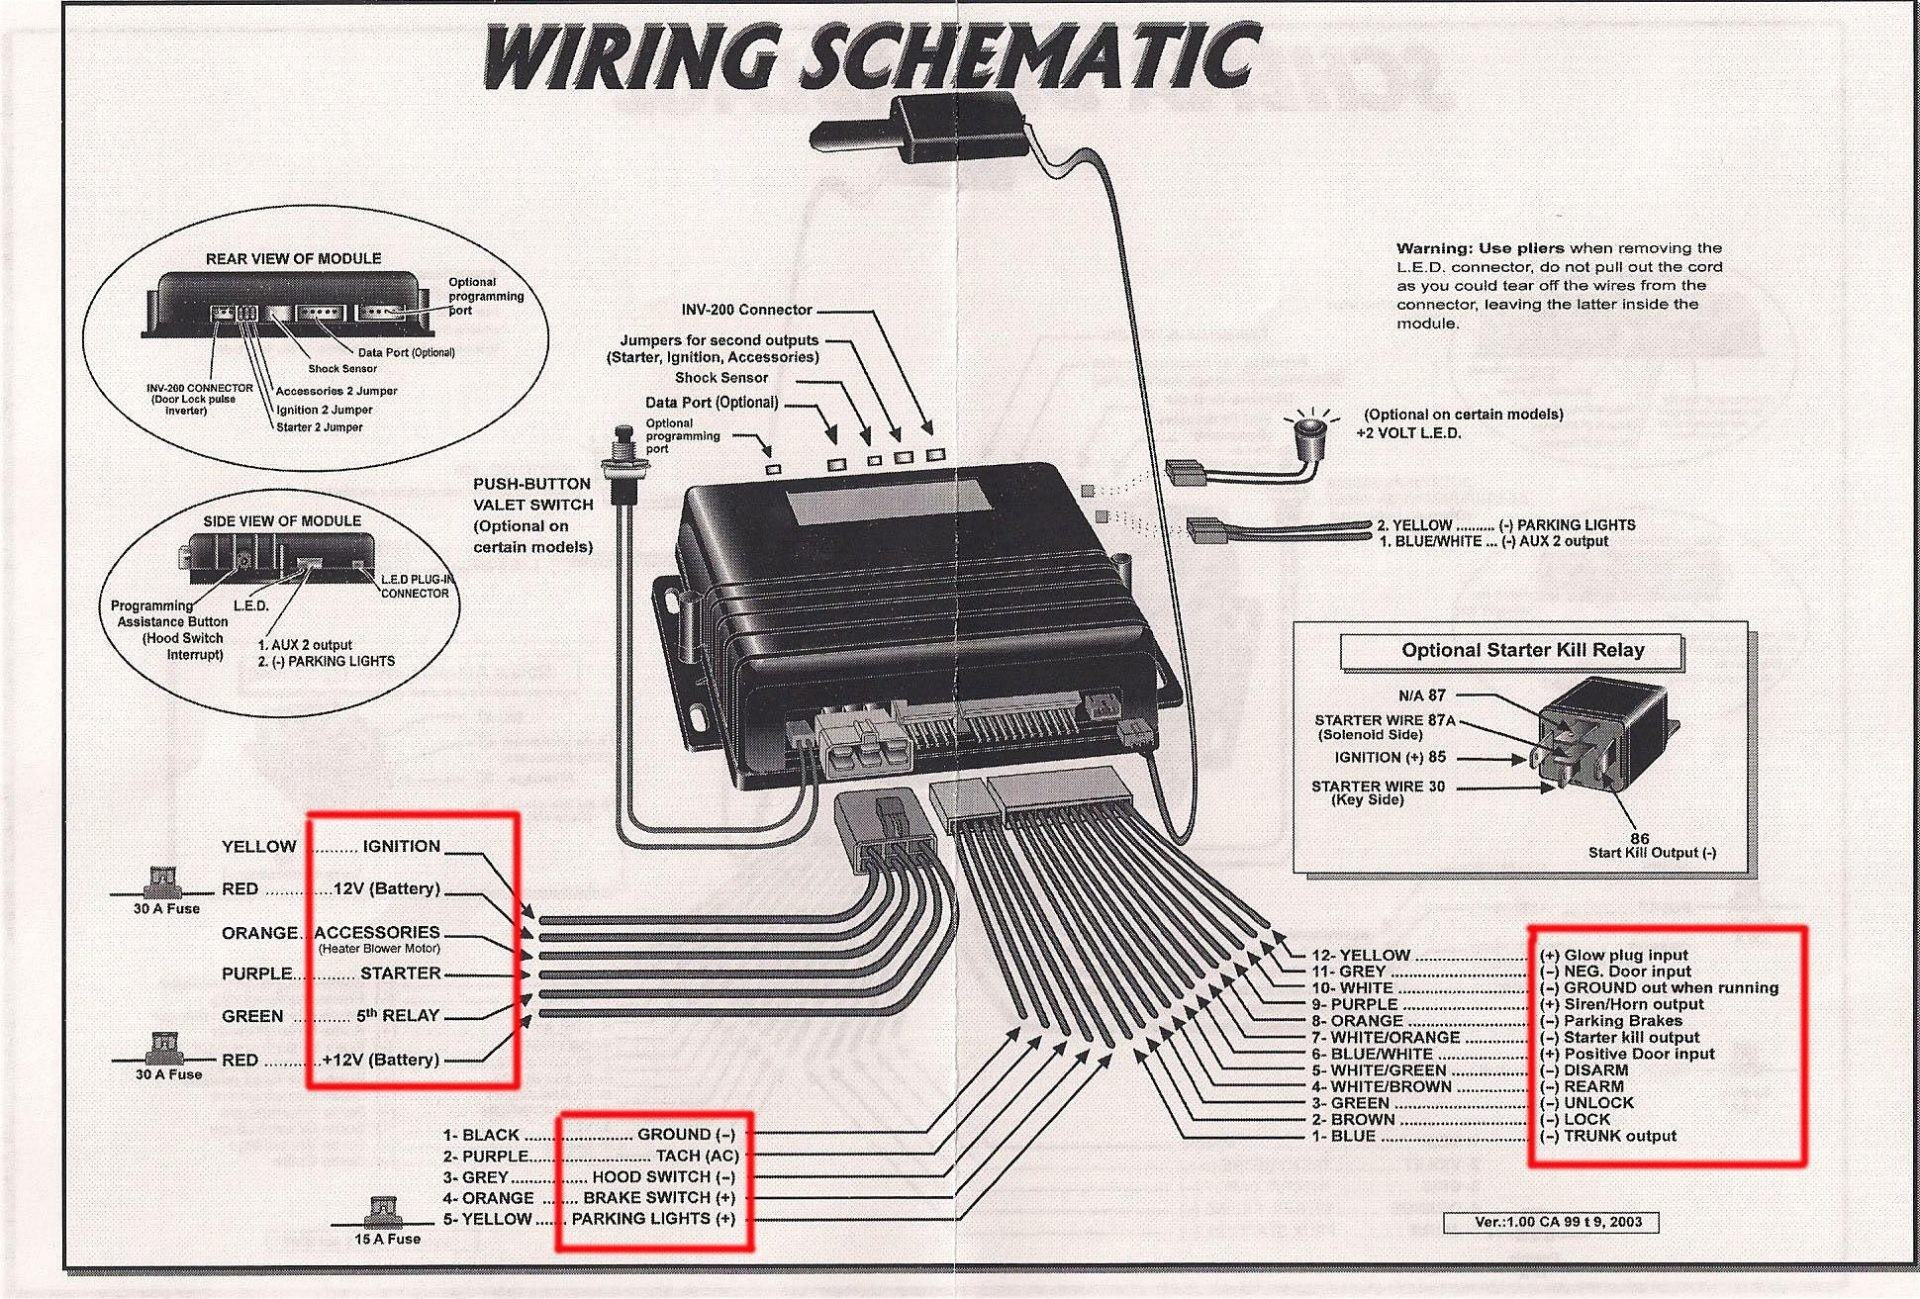 Passkey 3 Bypass Diagram Car Starter Wiring Diagrams Wiring Diagram Content